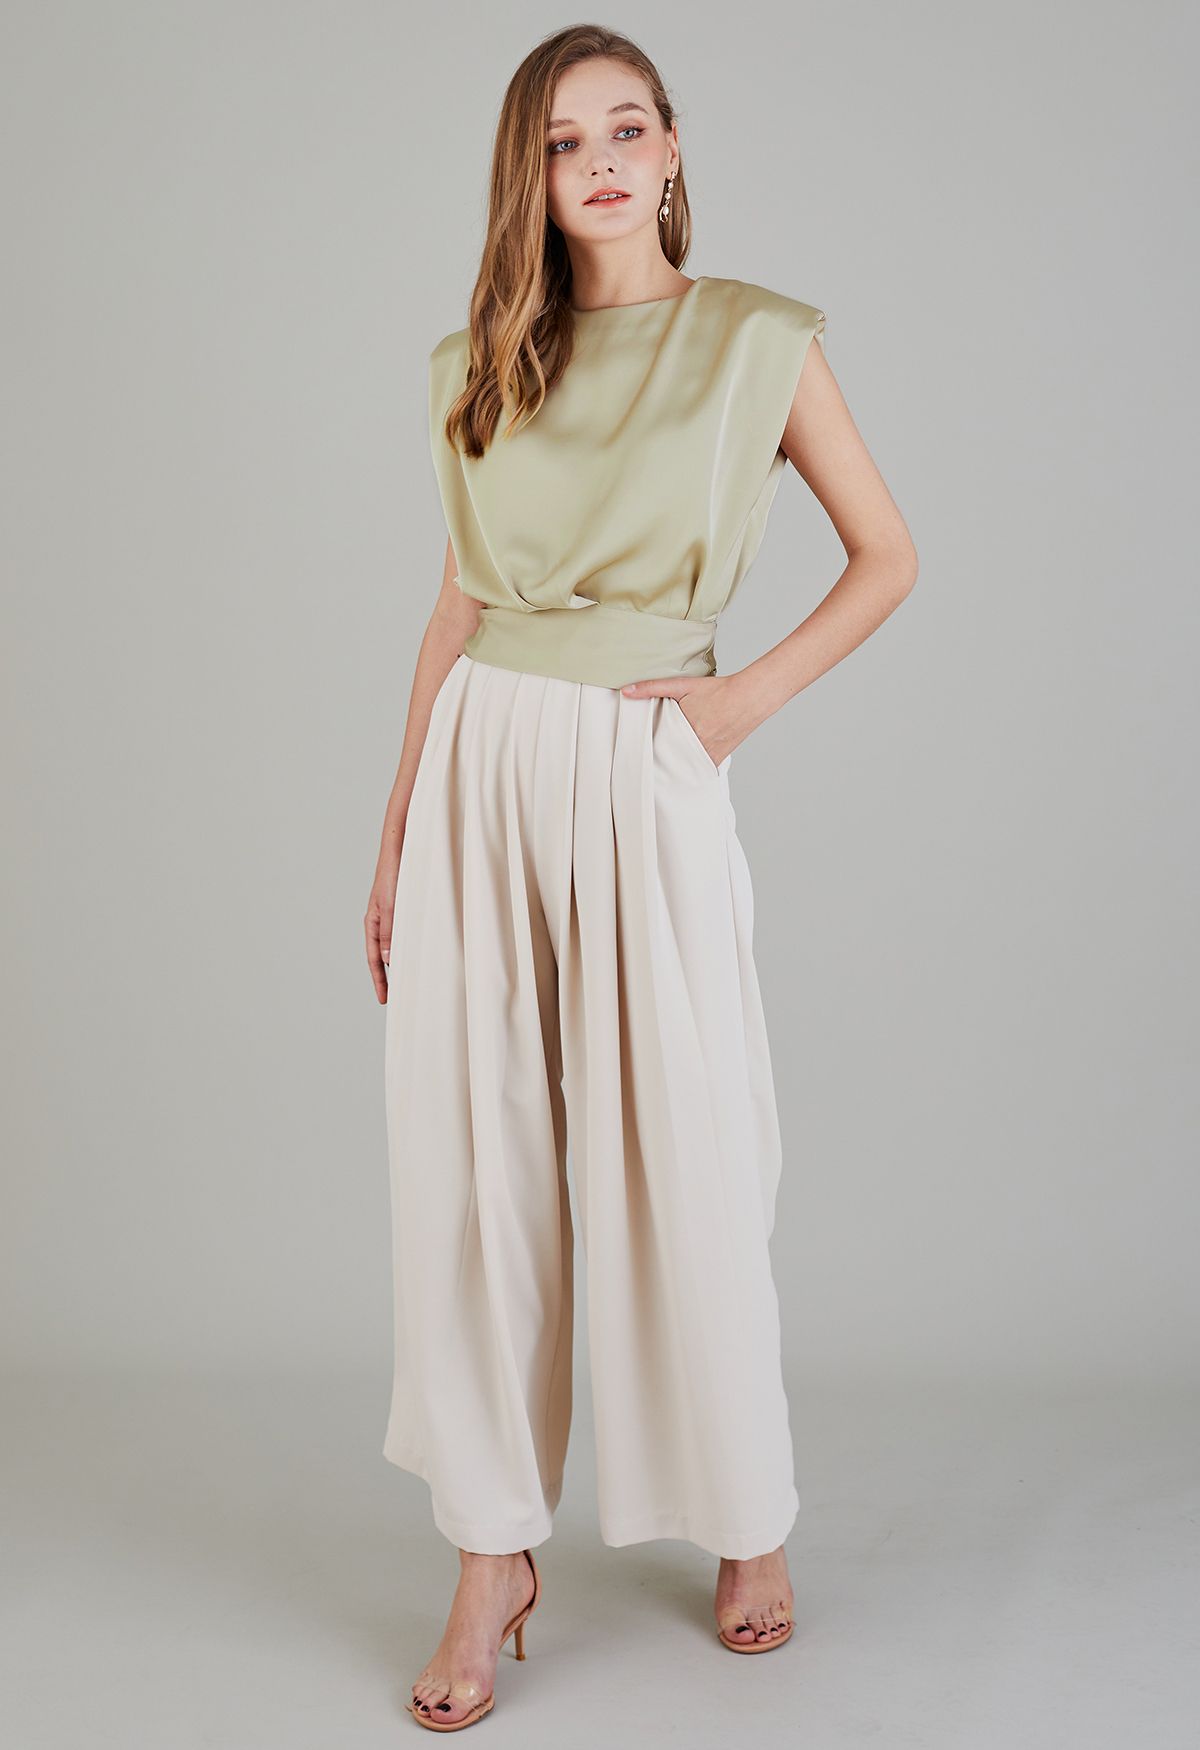 Flamboyant Natural Women's Wide Leg Pants with Pockets